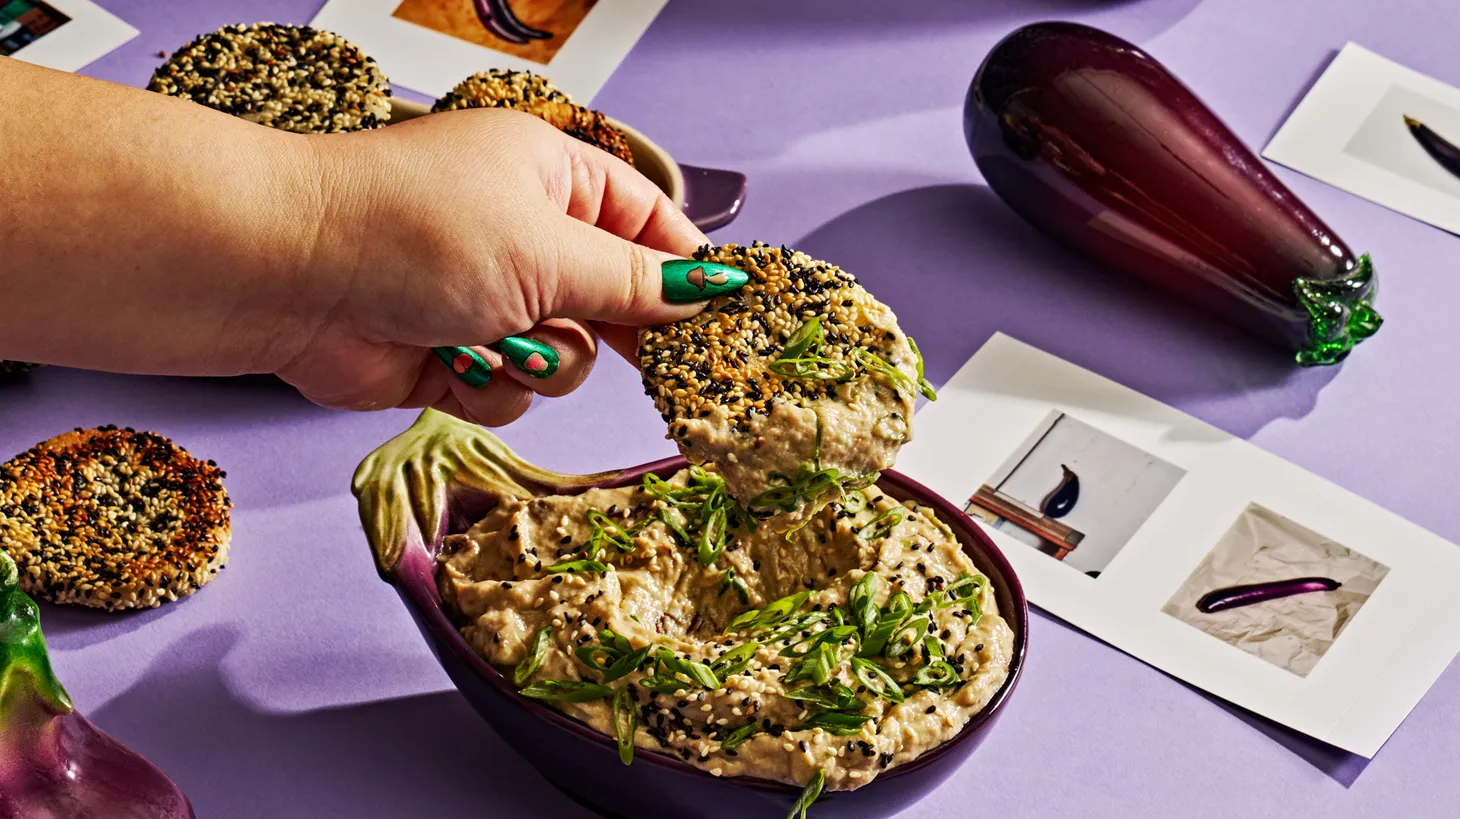 Alyse Whitney’s recipe for Miso Eggplant Dip features a silken tofu base to create a luxurious and nutrition-packed snack.